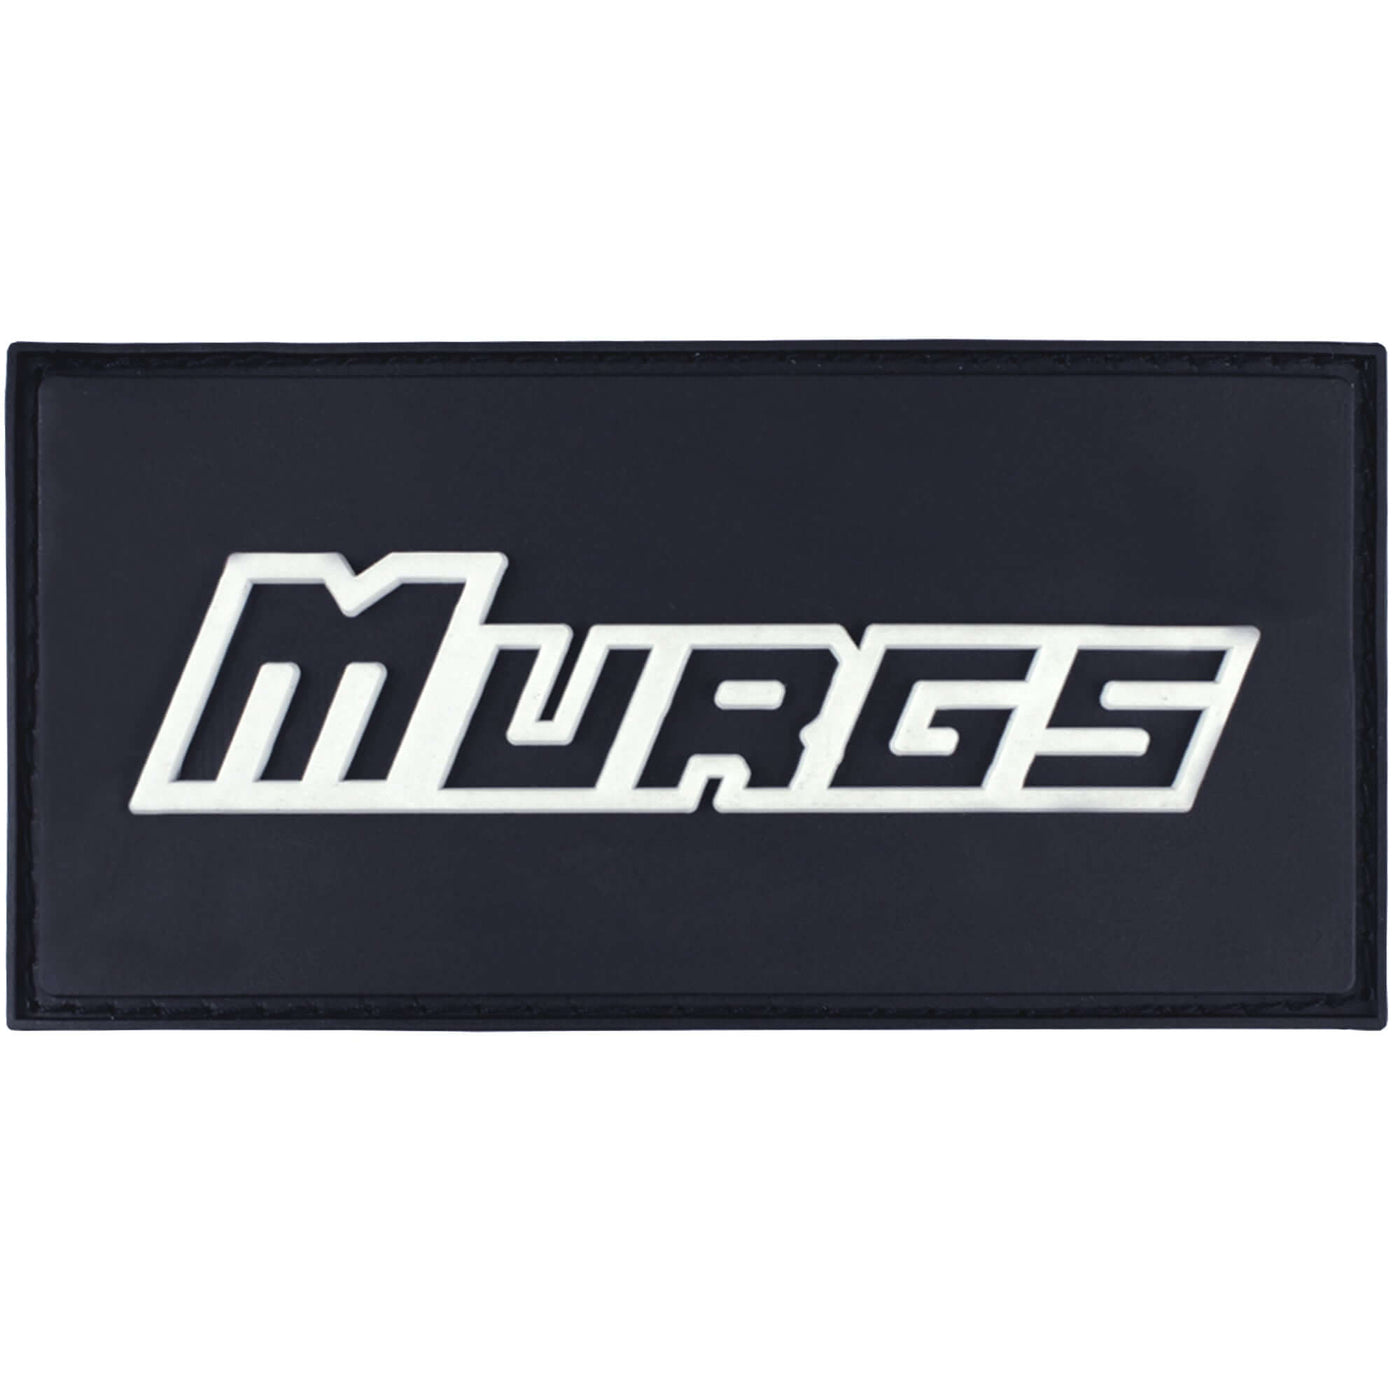 Black Murgs rubber patch with white embossed logo